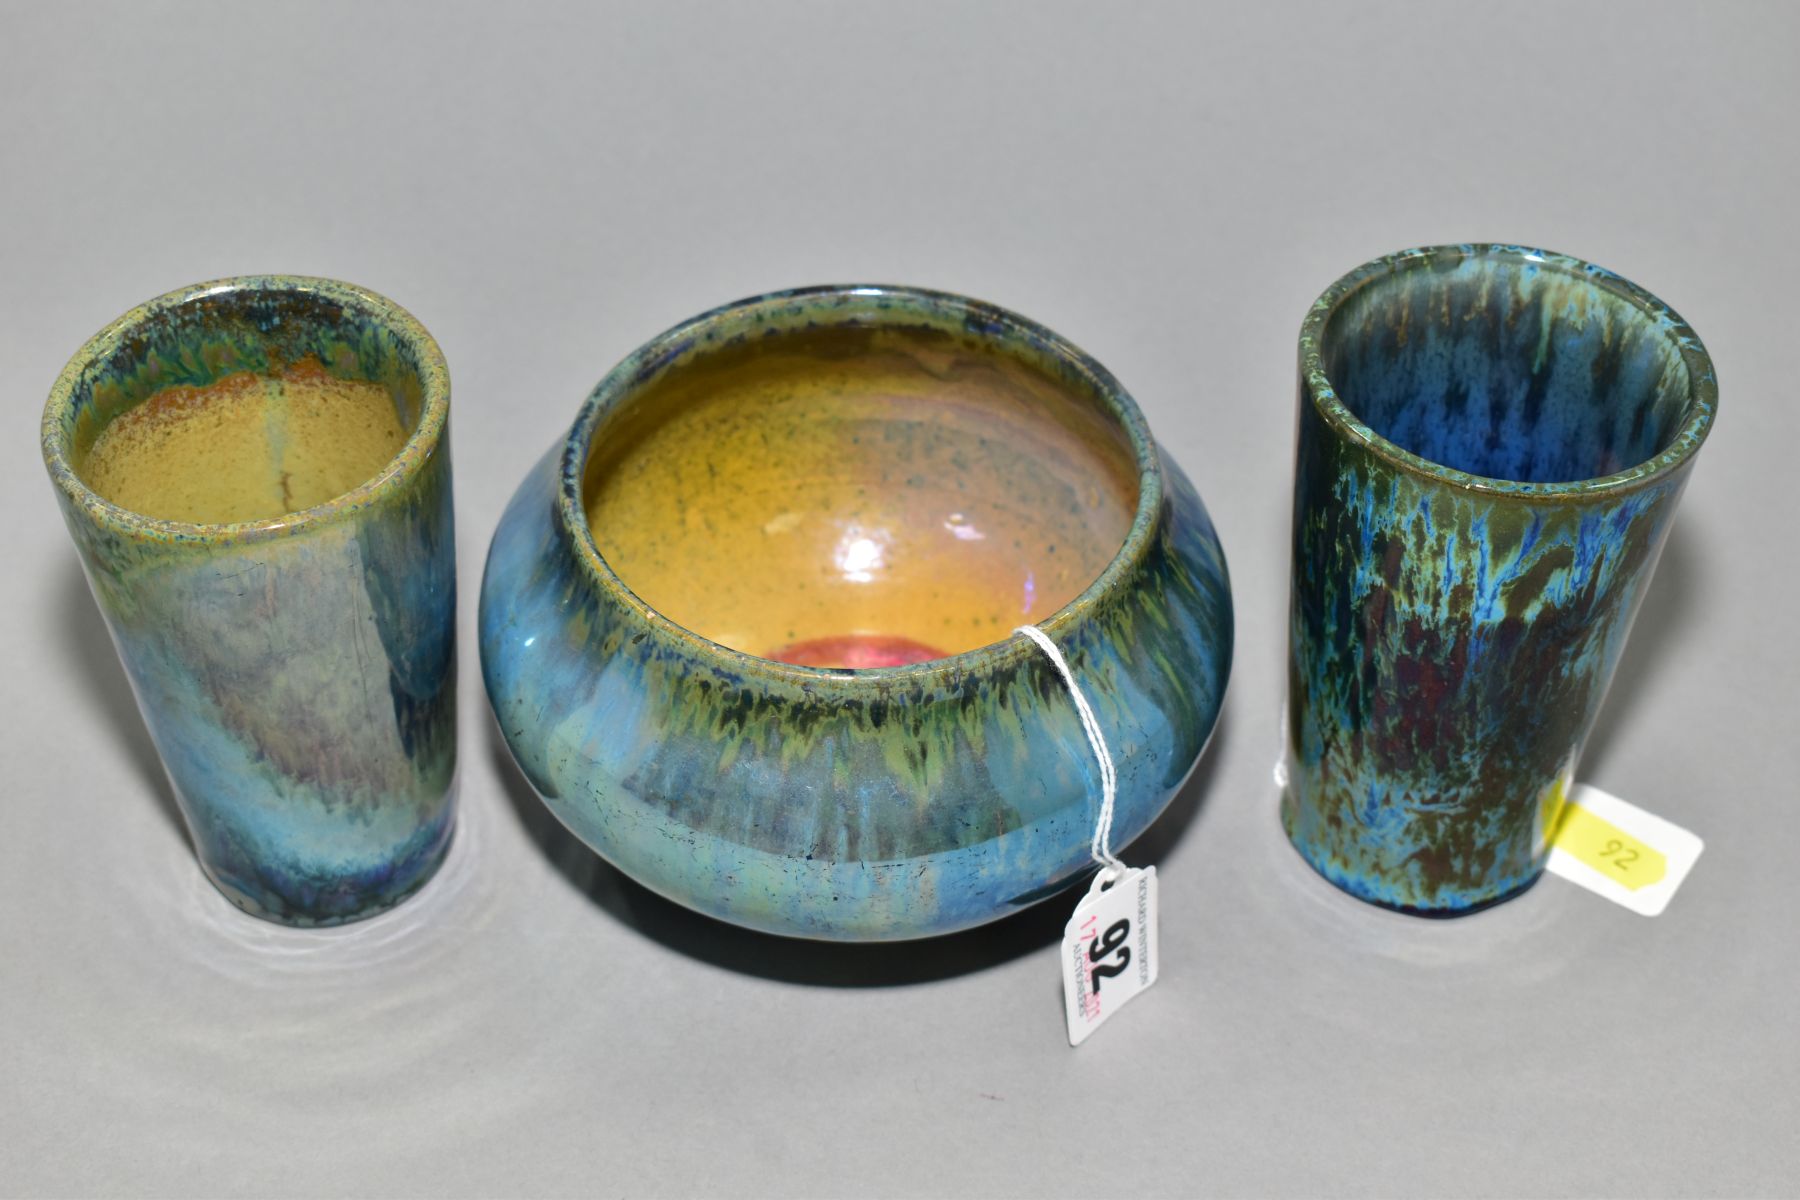 ALPHONSE CYTERE (FRANCE 1861-1941) for Ramberville Pottery, comprising an iridescent drip glaze - Image 2 of 4